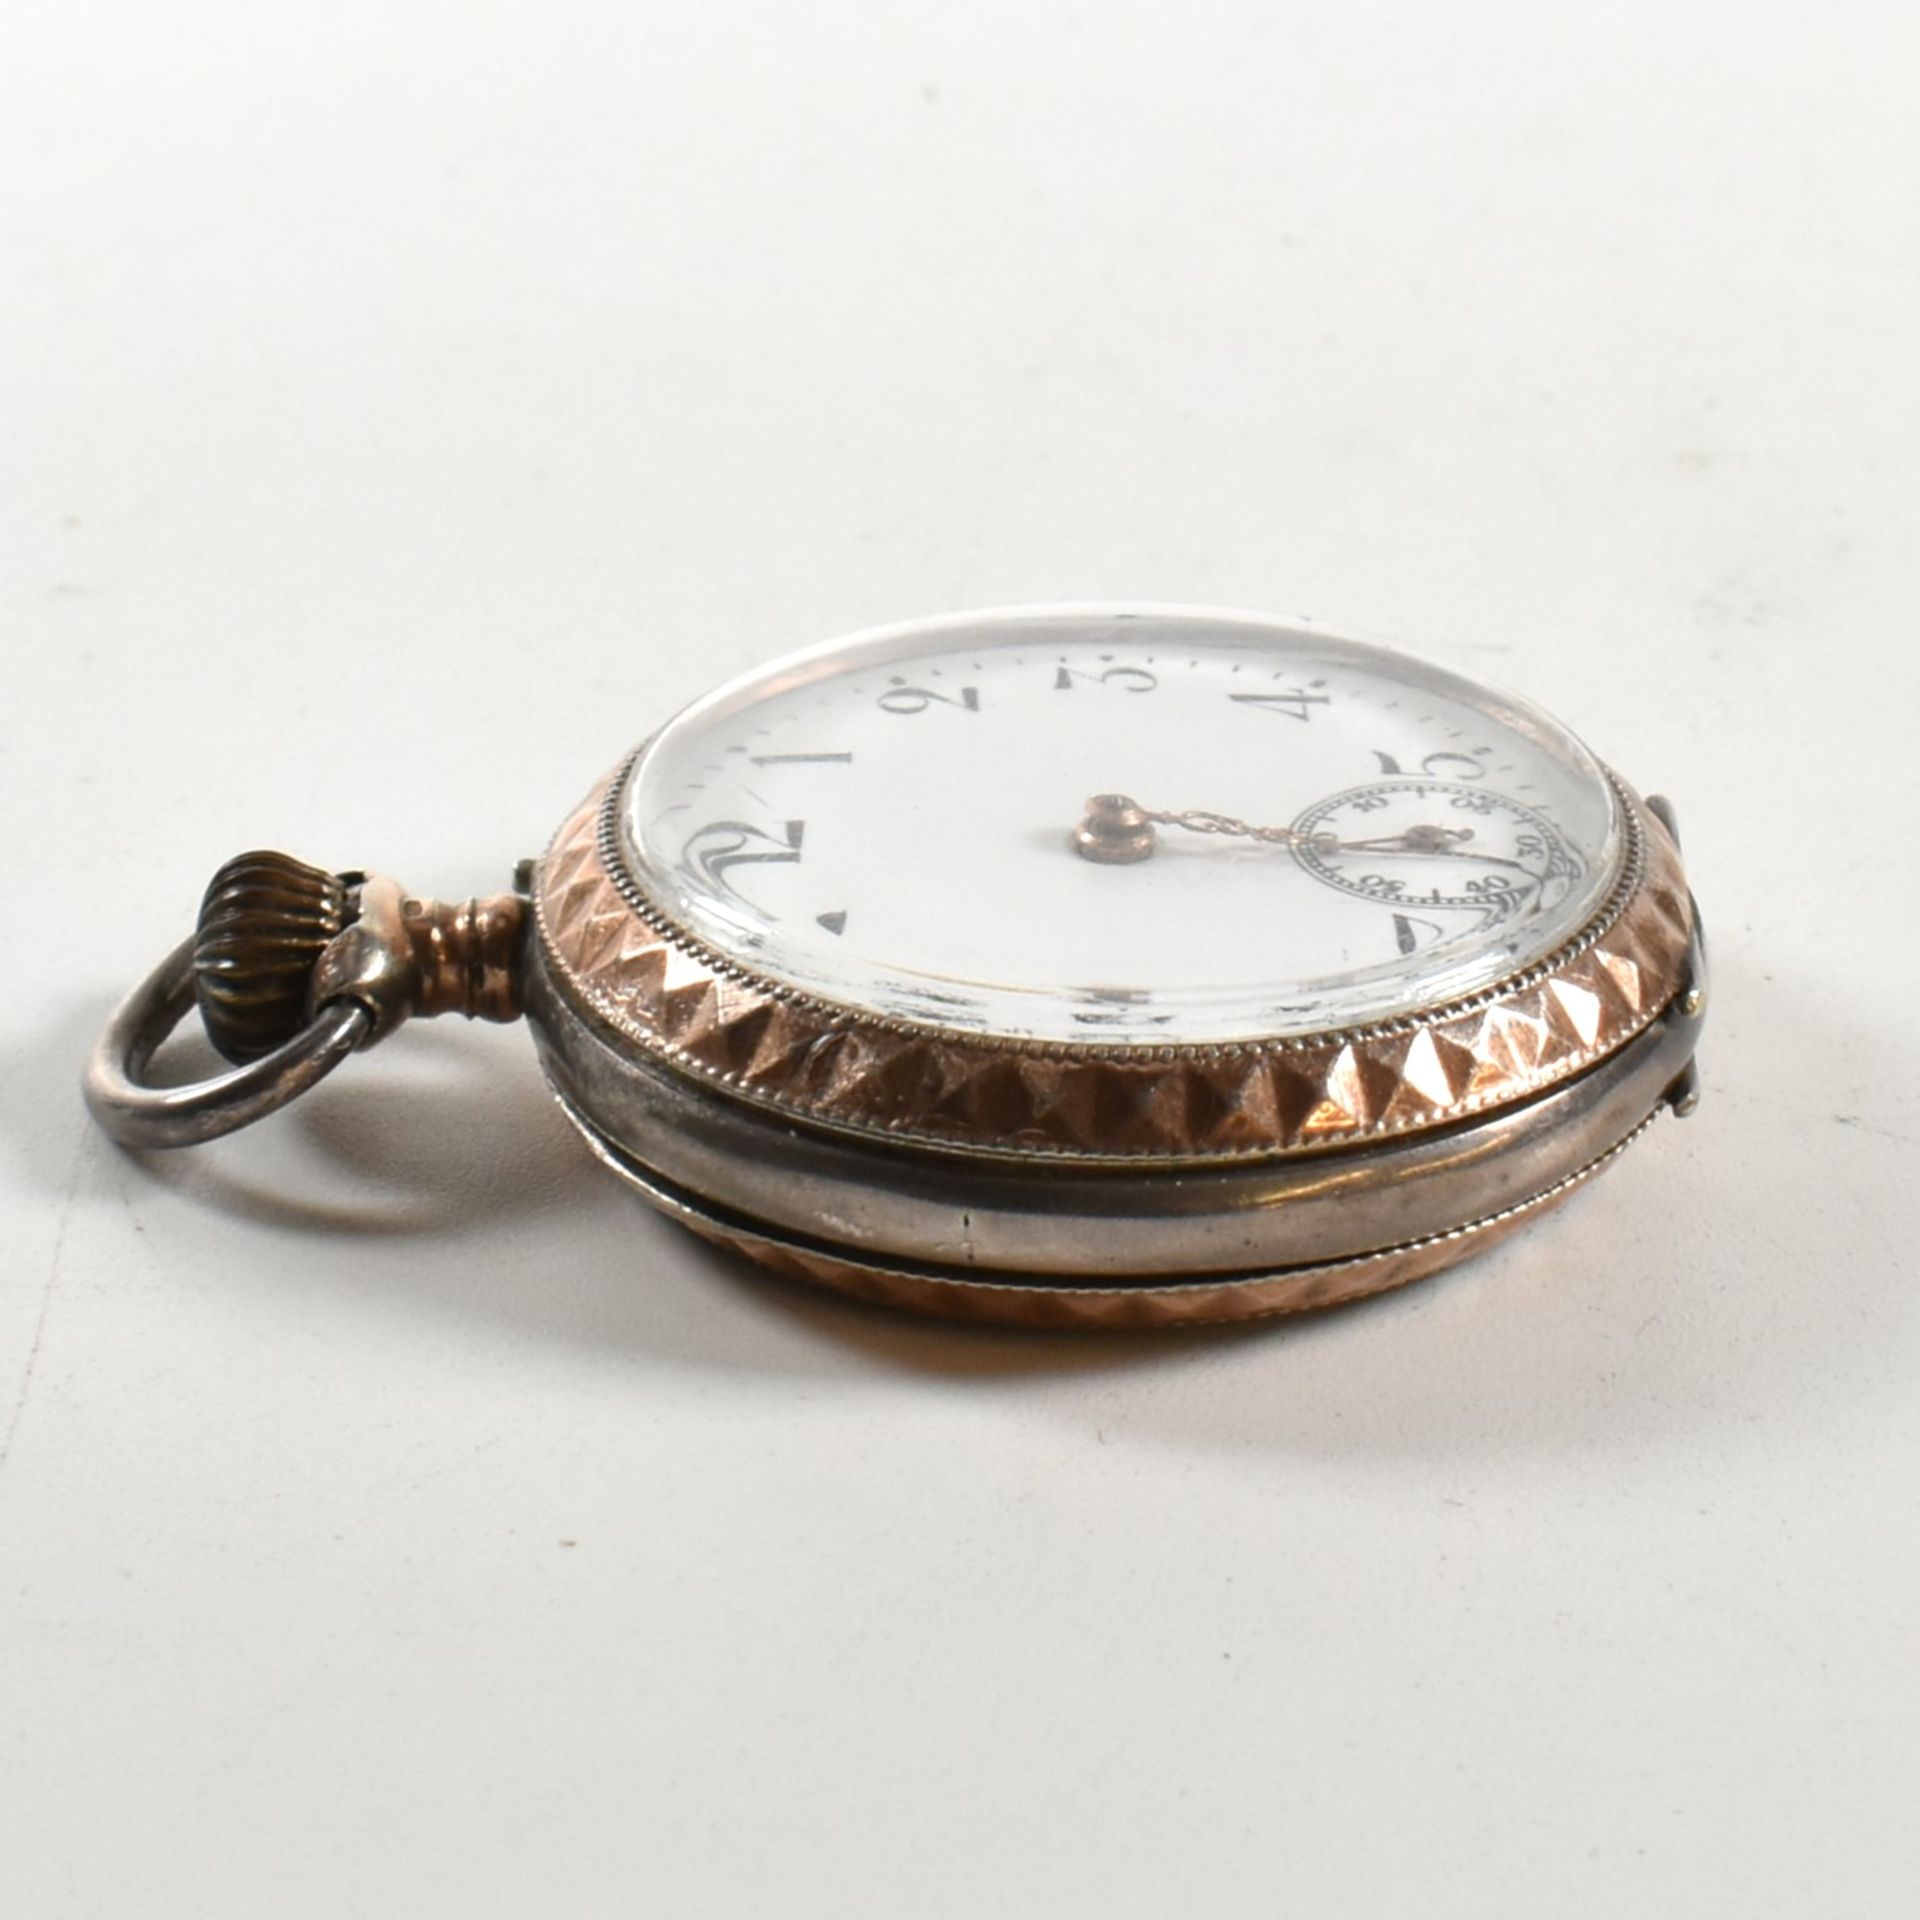 SILVER 800 CONTINENTAL OPEN FACED CROWN WIND POCKET WATCH - Image 8 of 8